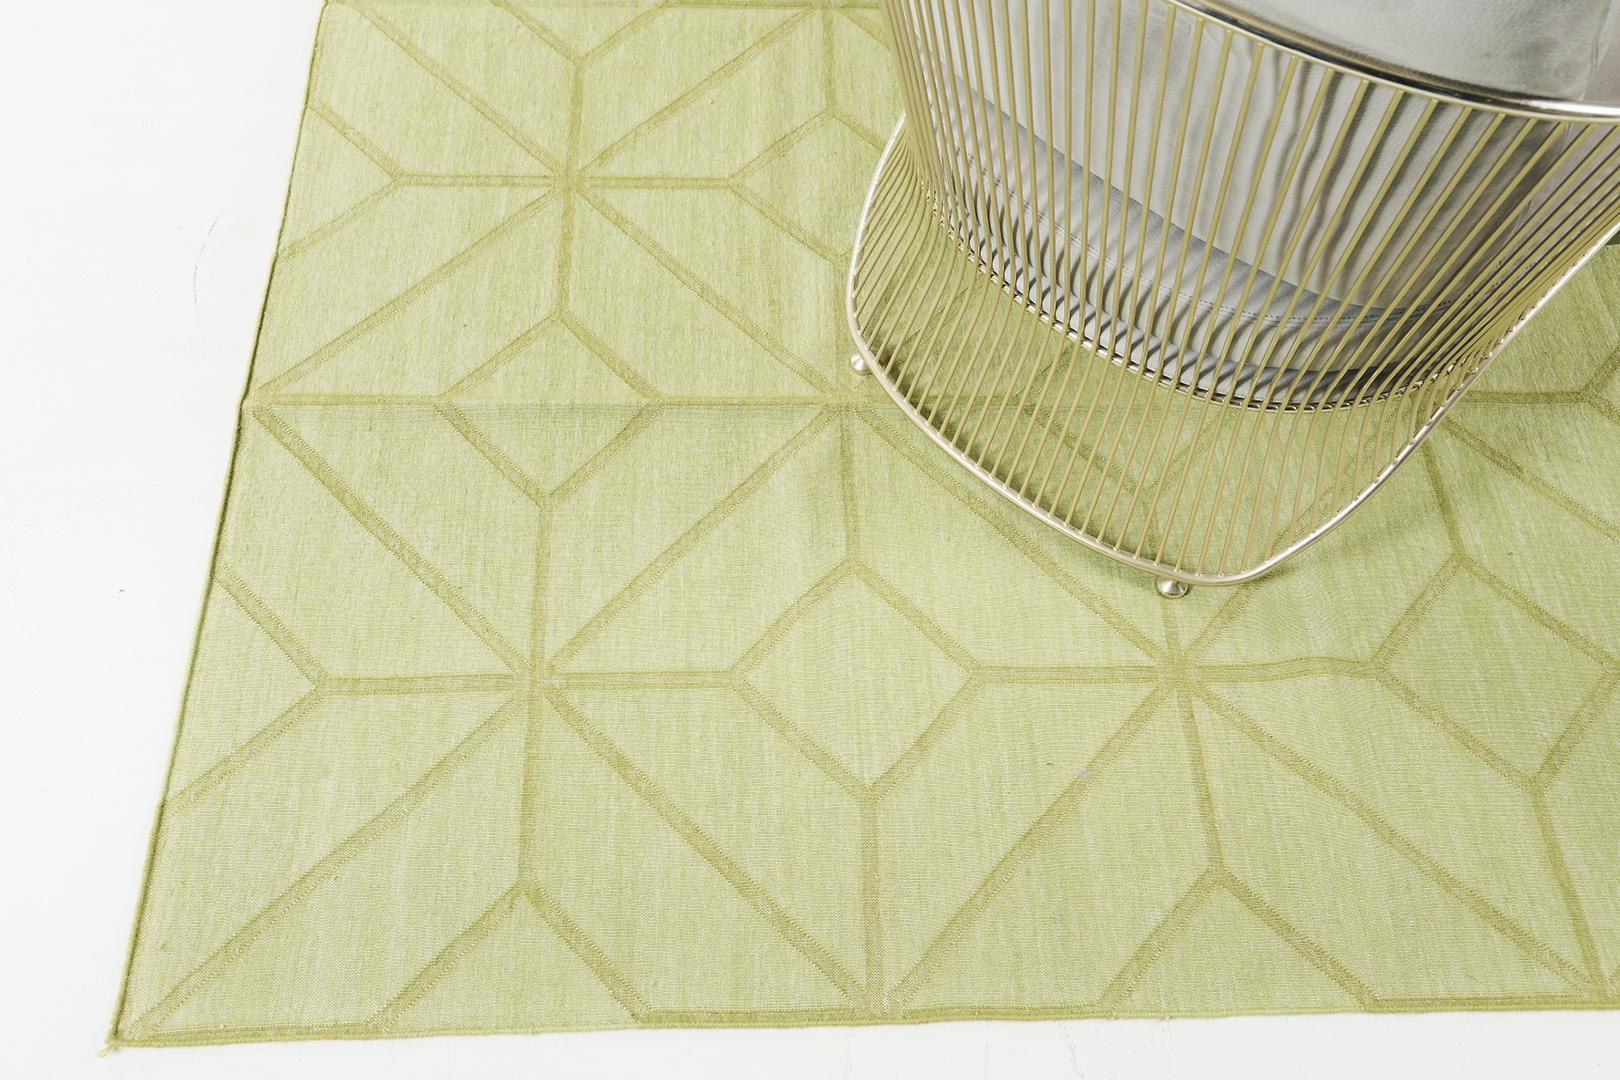 Diamante’ creates an optical illusion of diamonds rendered in the relaxing olive colour. Majestic and beguiling, this rug will surely add distinct character to one’s space. Mehraban's Cielo collection is recognized for its captivating rhythm and